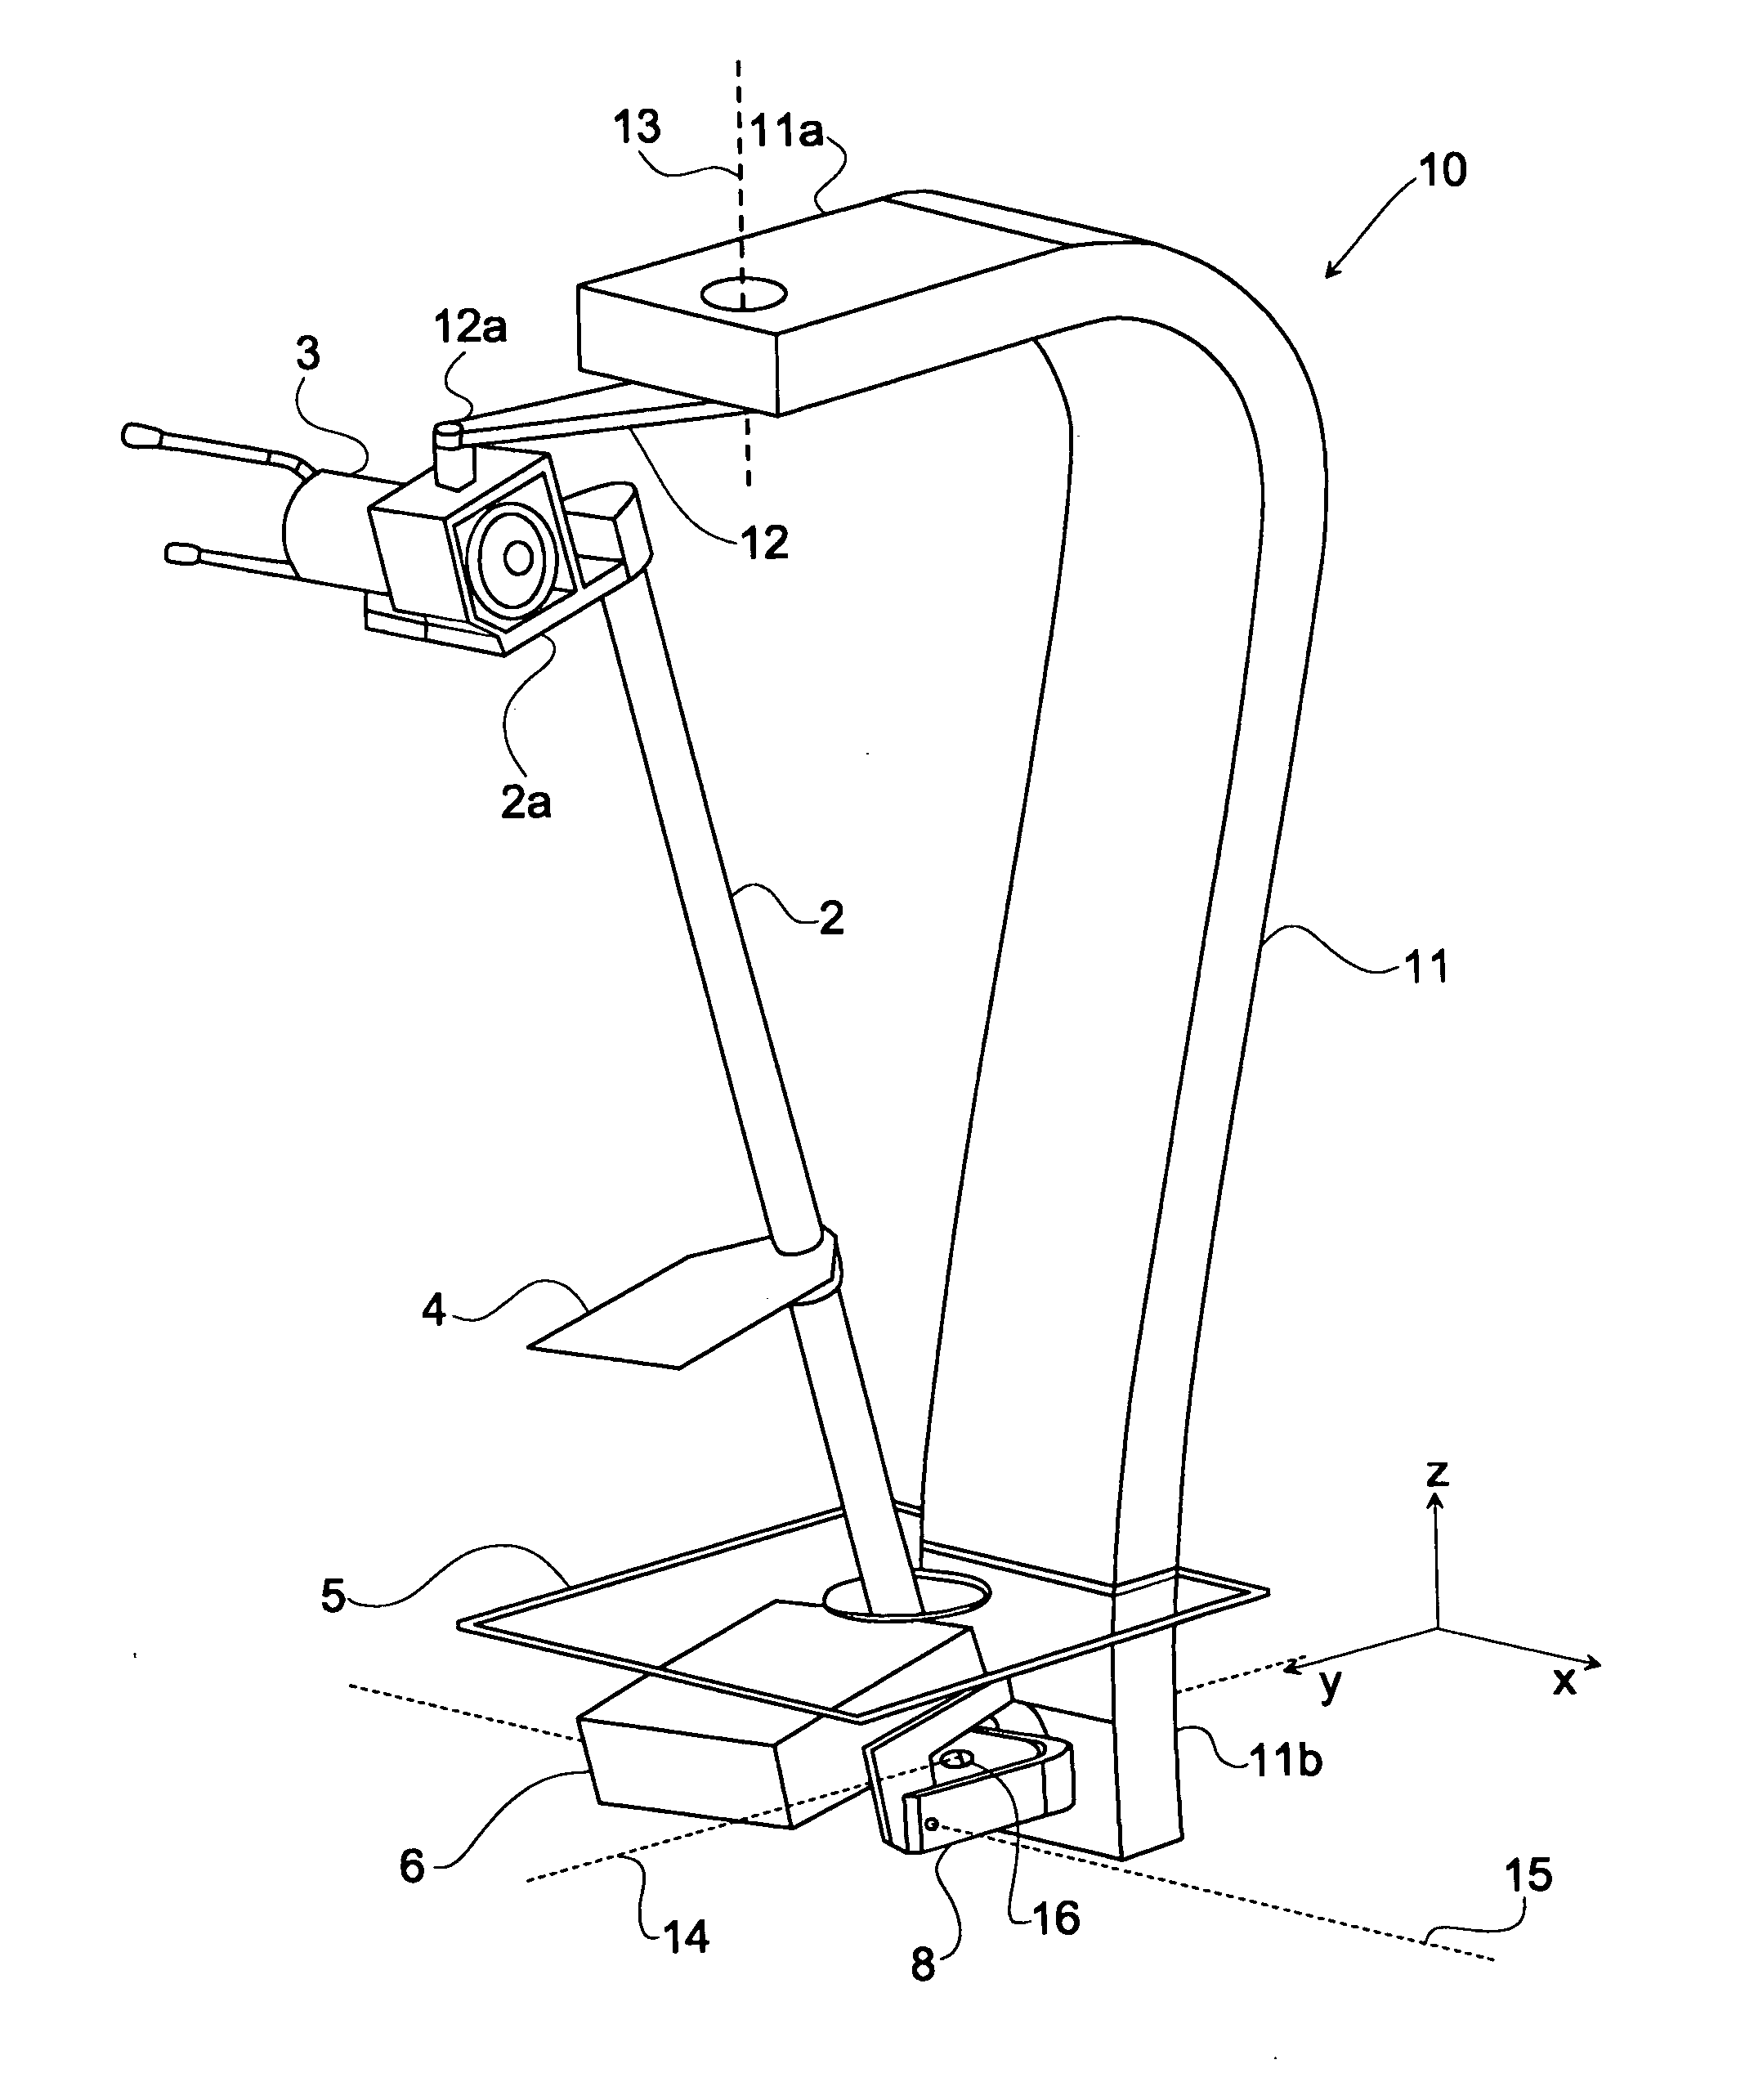 Apparatus and method for recording radiation image data of an object